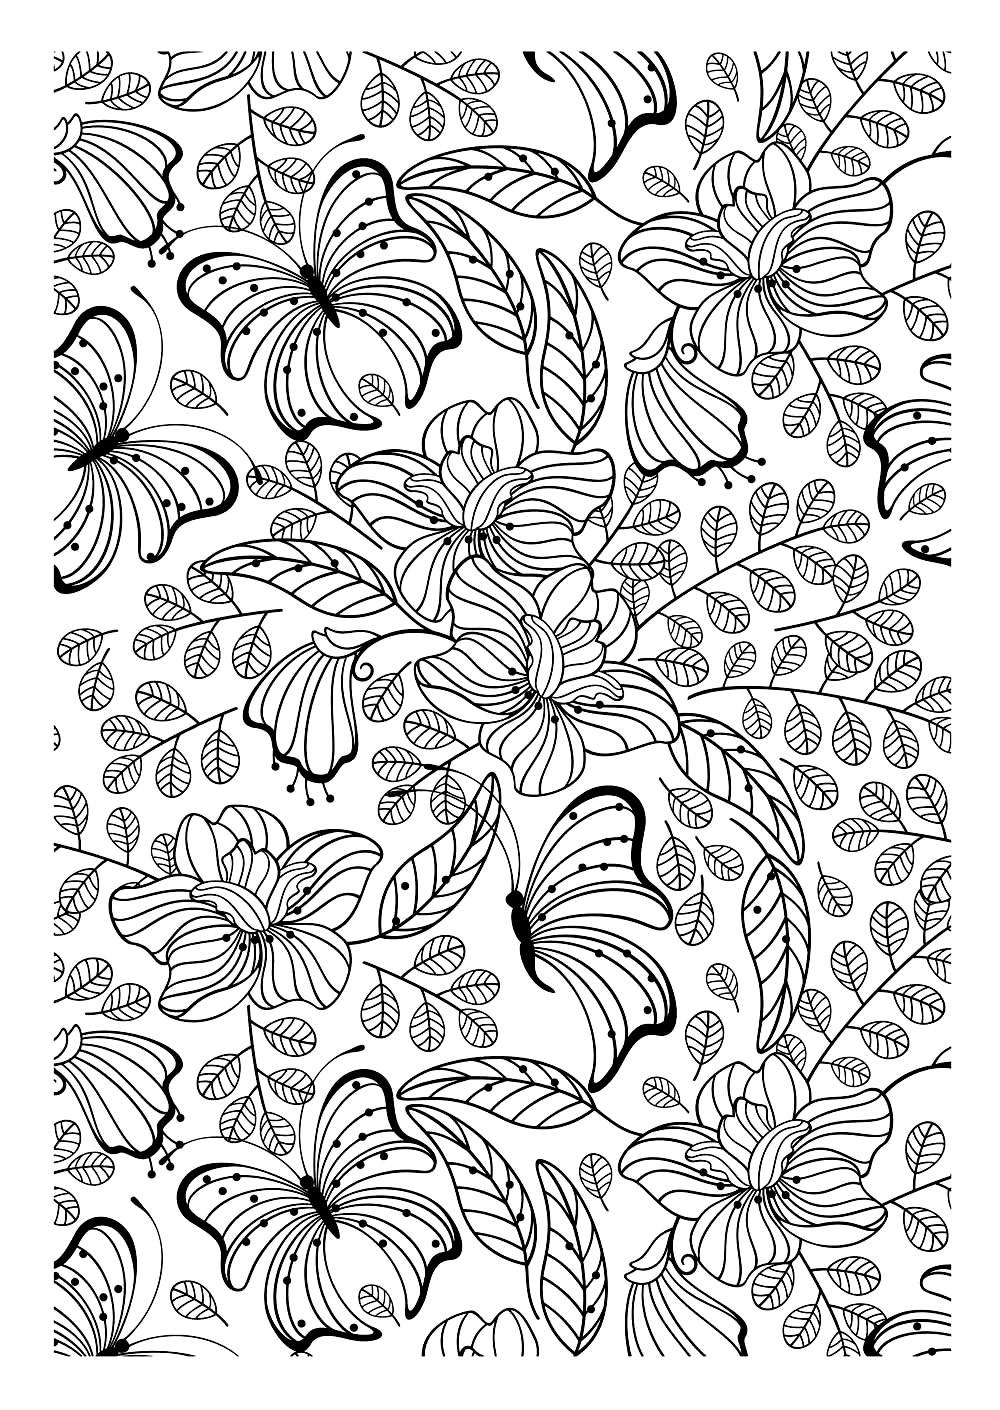 image=insectes coloriage adulte papillons 1